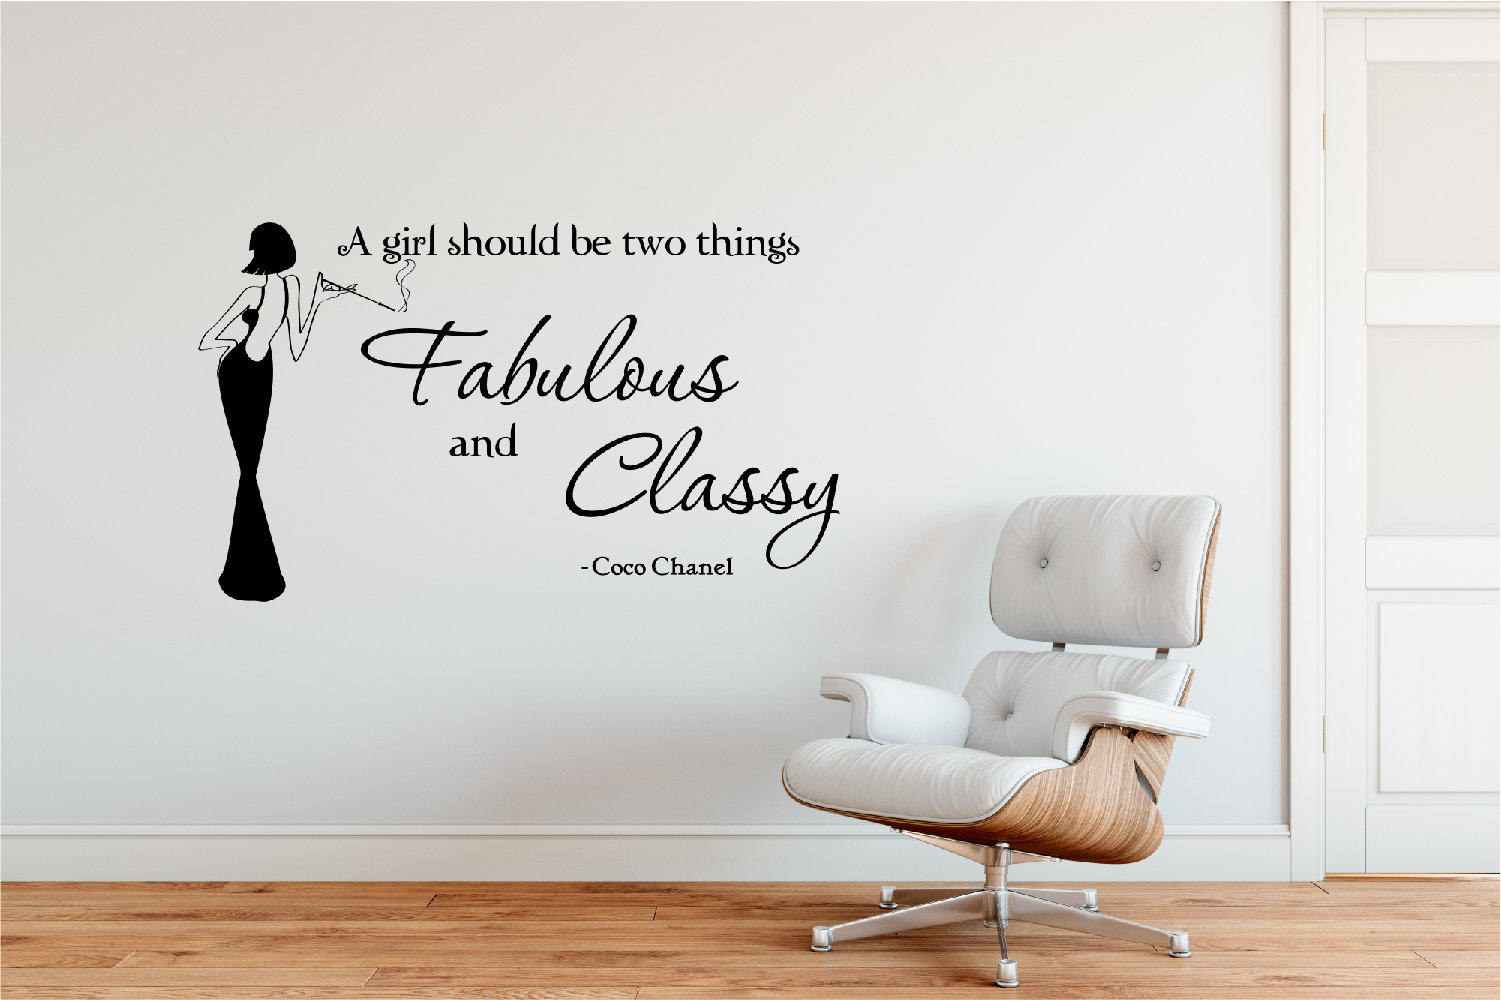 Fabulous and Classy Coco Chanel Quality Vinyl Wall Decal 